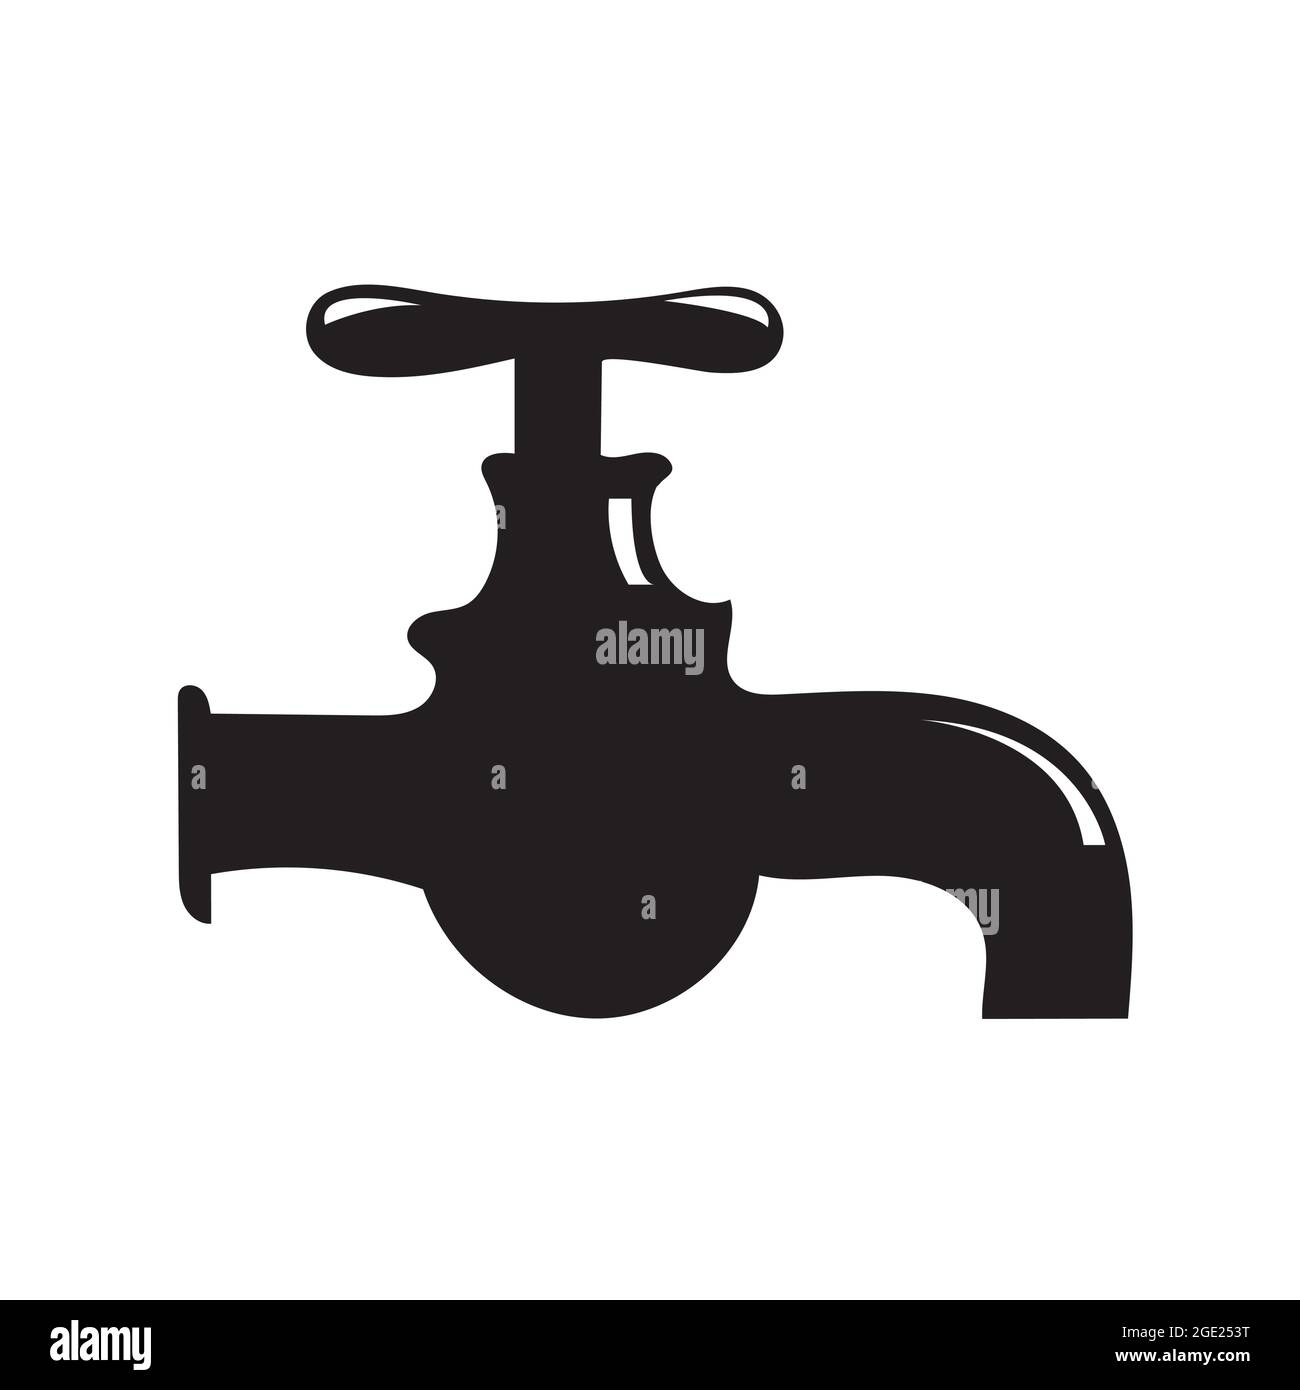 Water tap vector icon isolated on white. Vintage faucet icon. Stock Vector